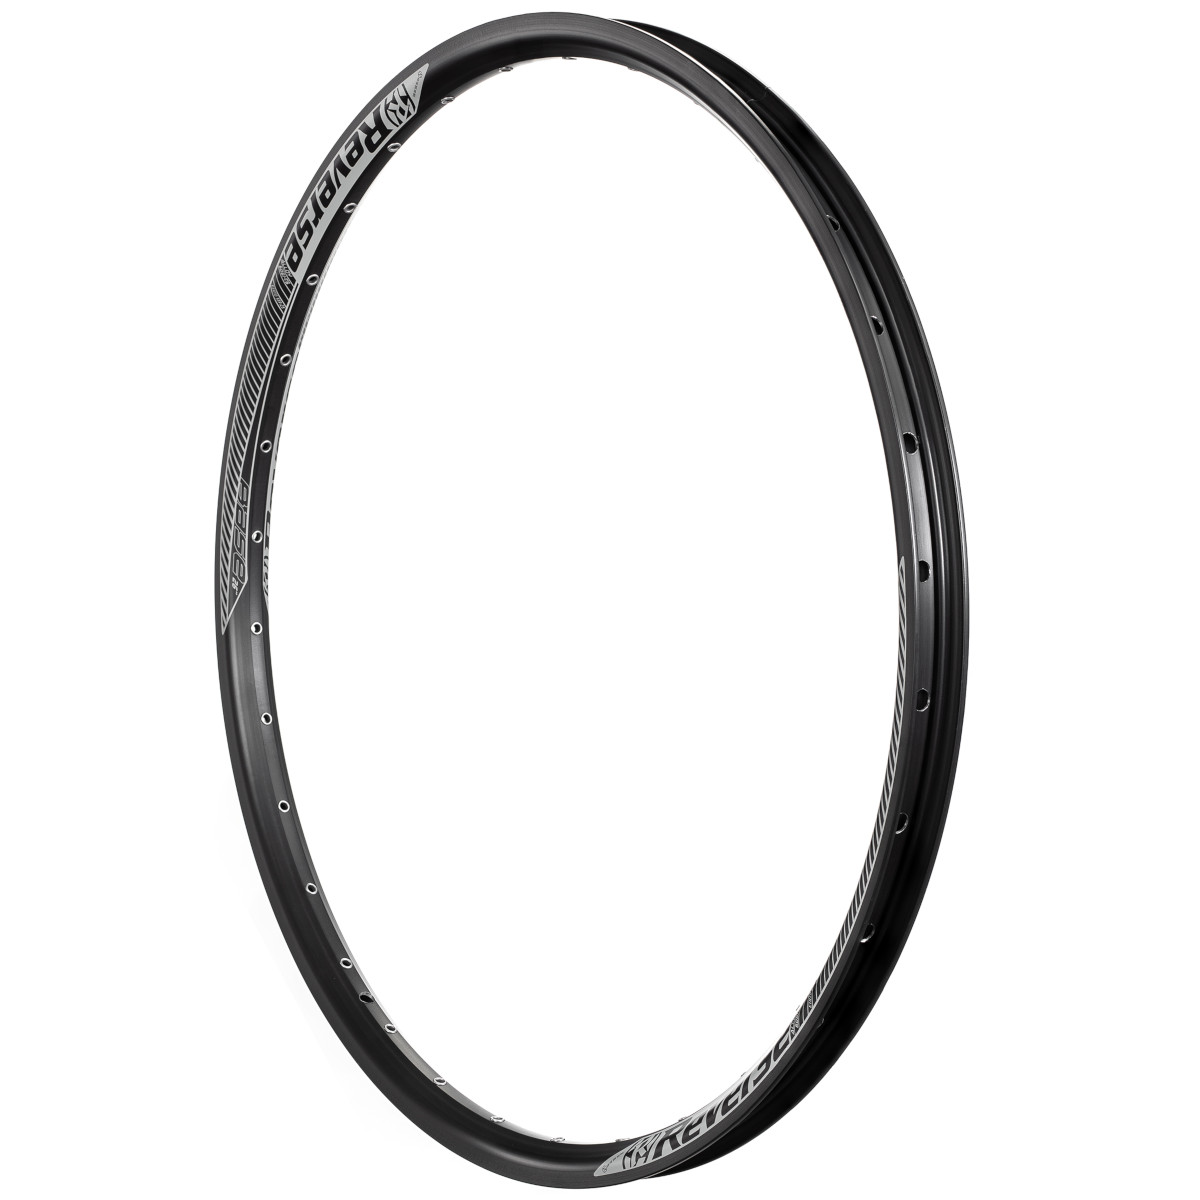 Picture of Reverse Components Base Light 26 Inch Rim - black/grey